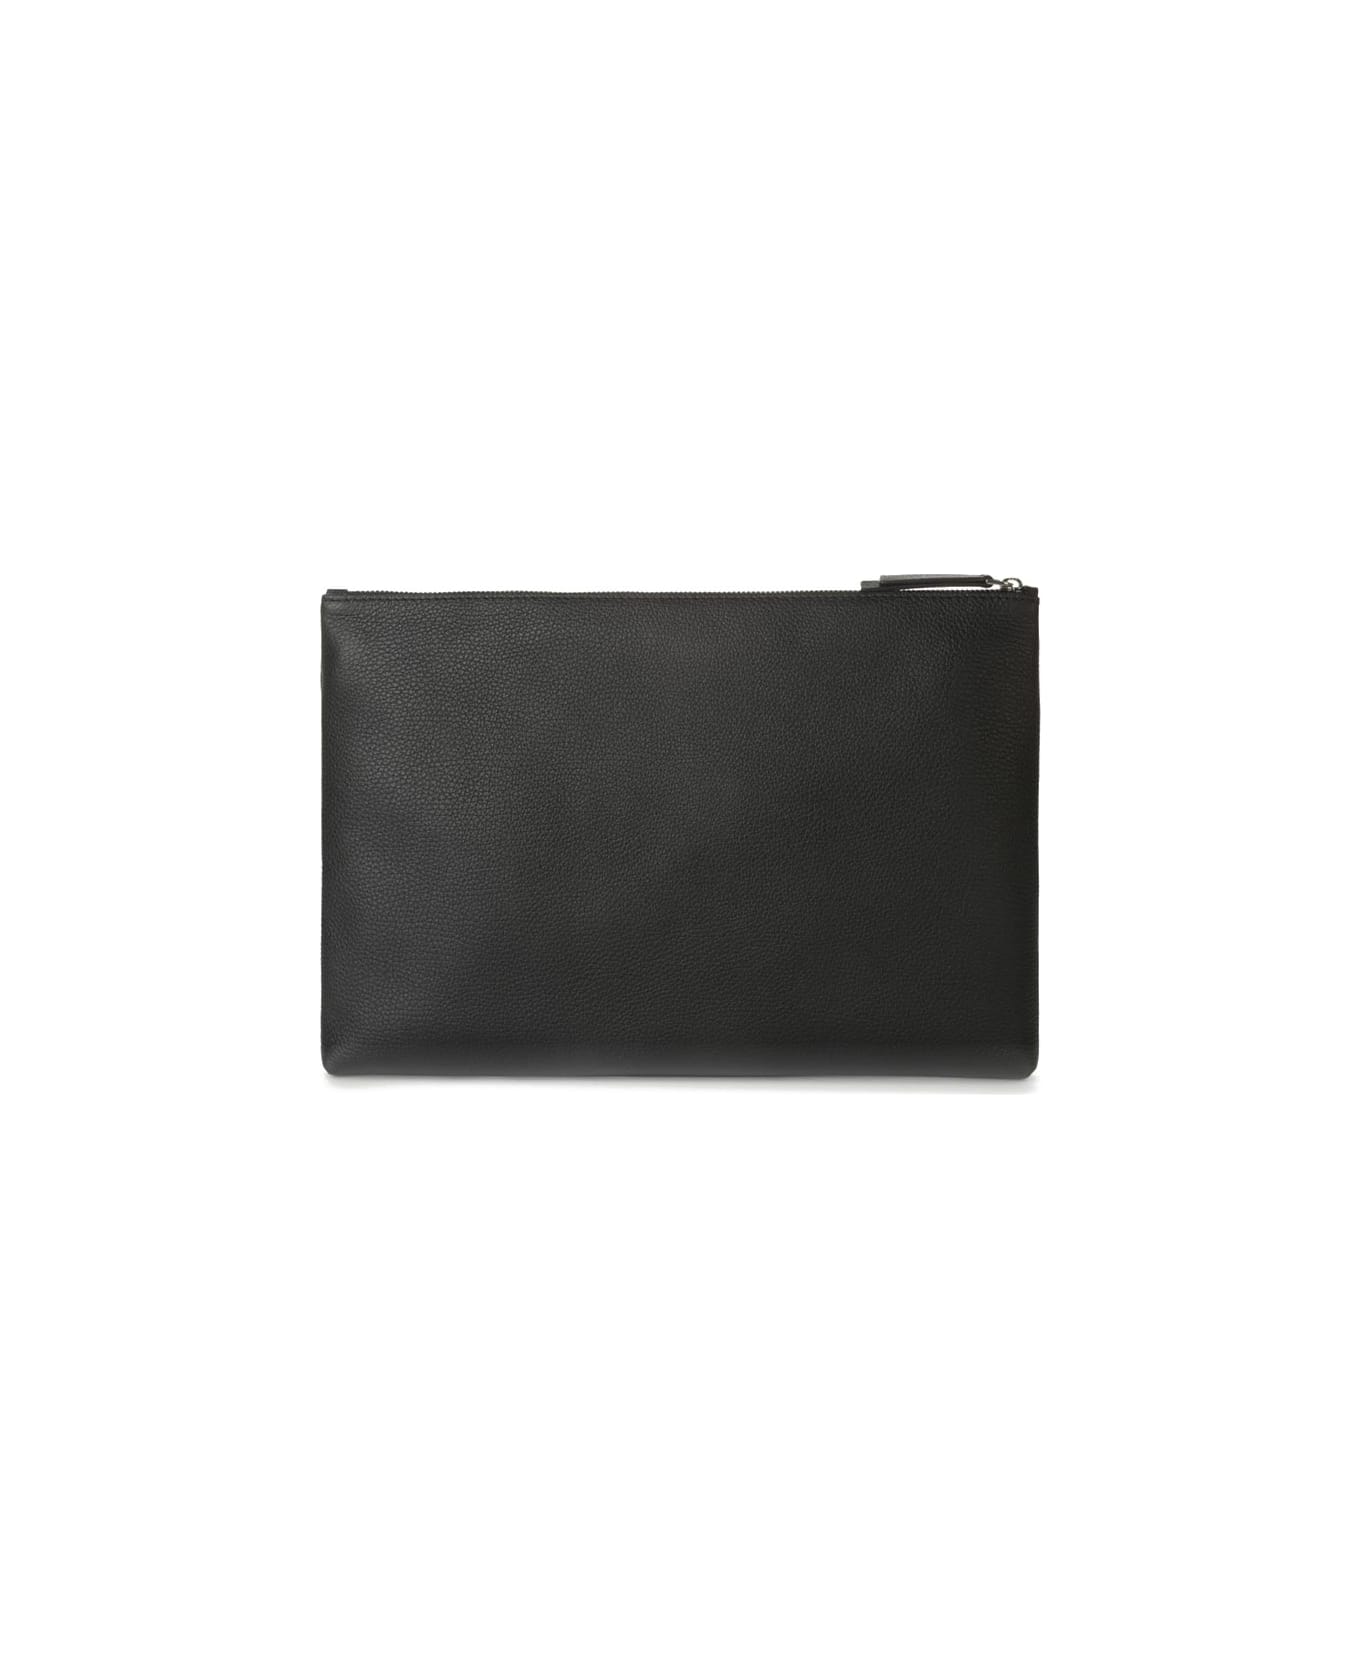 Orciani Leather Clutch Bag - NERO